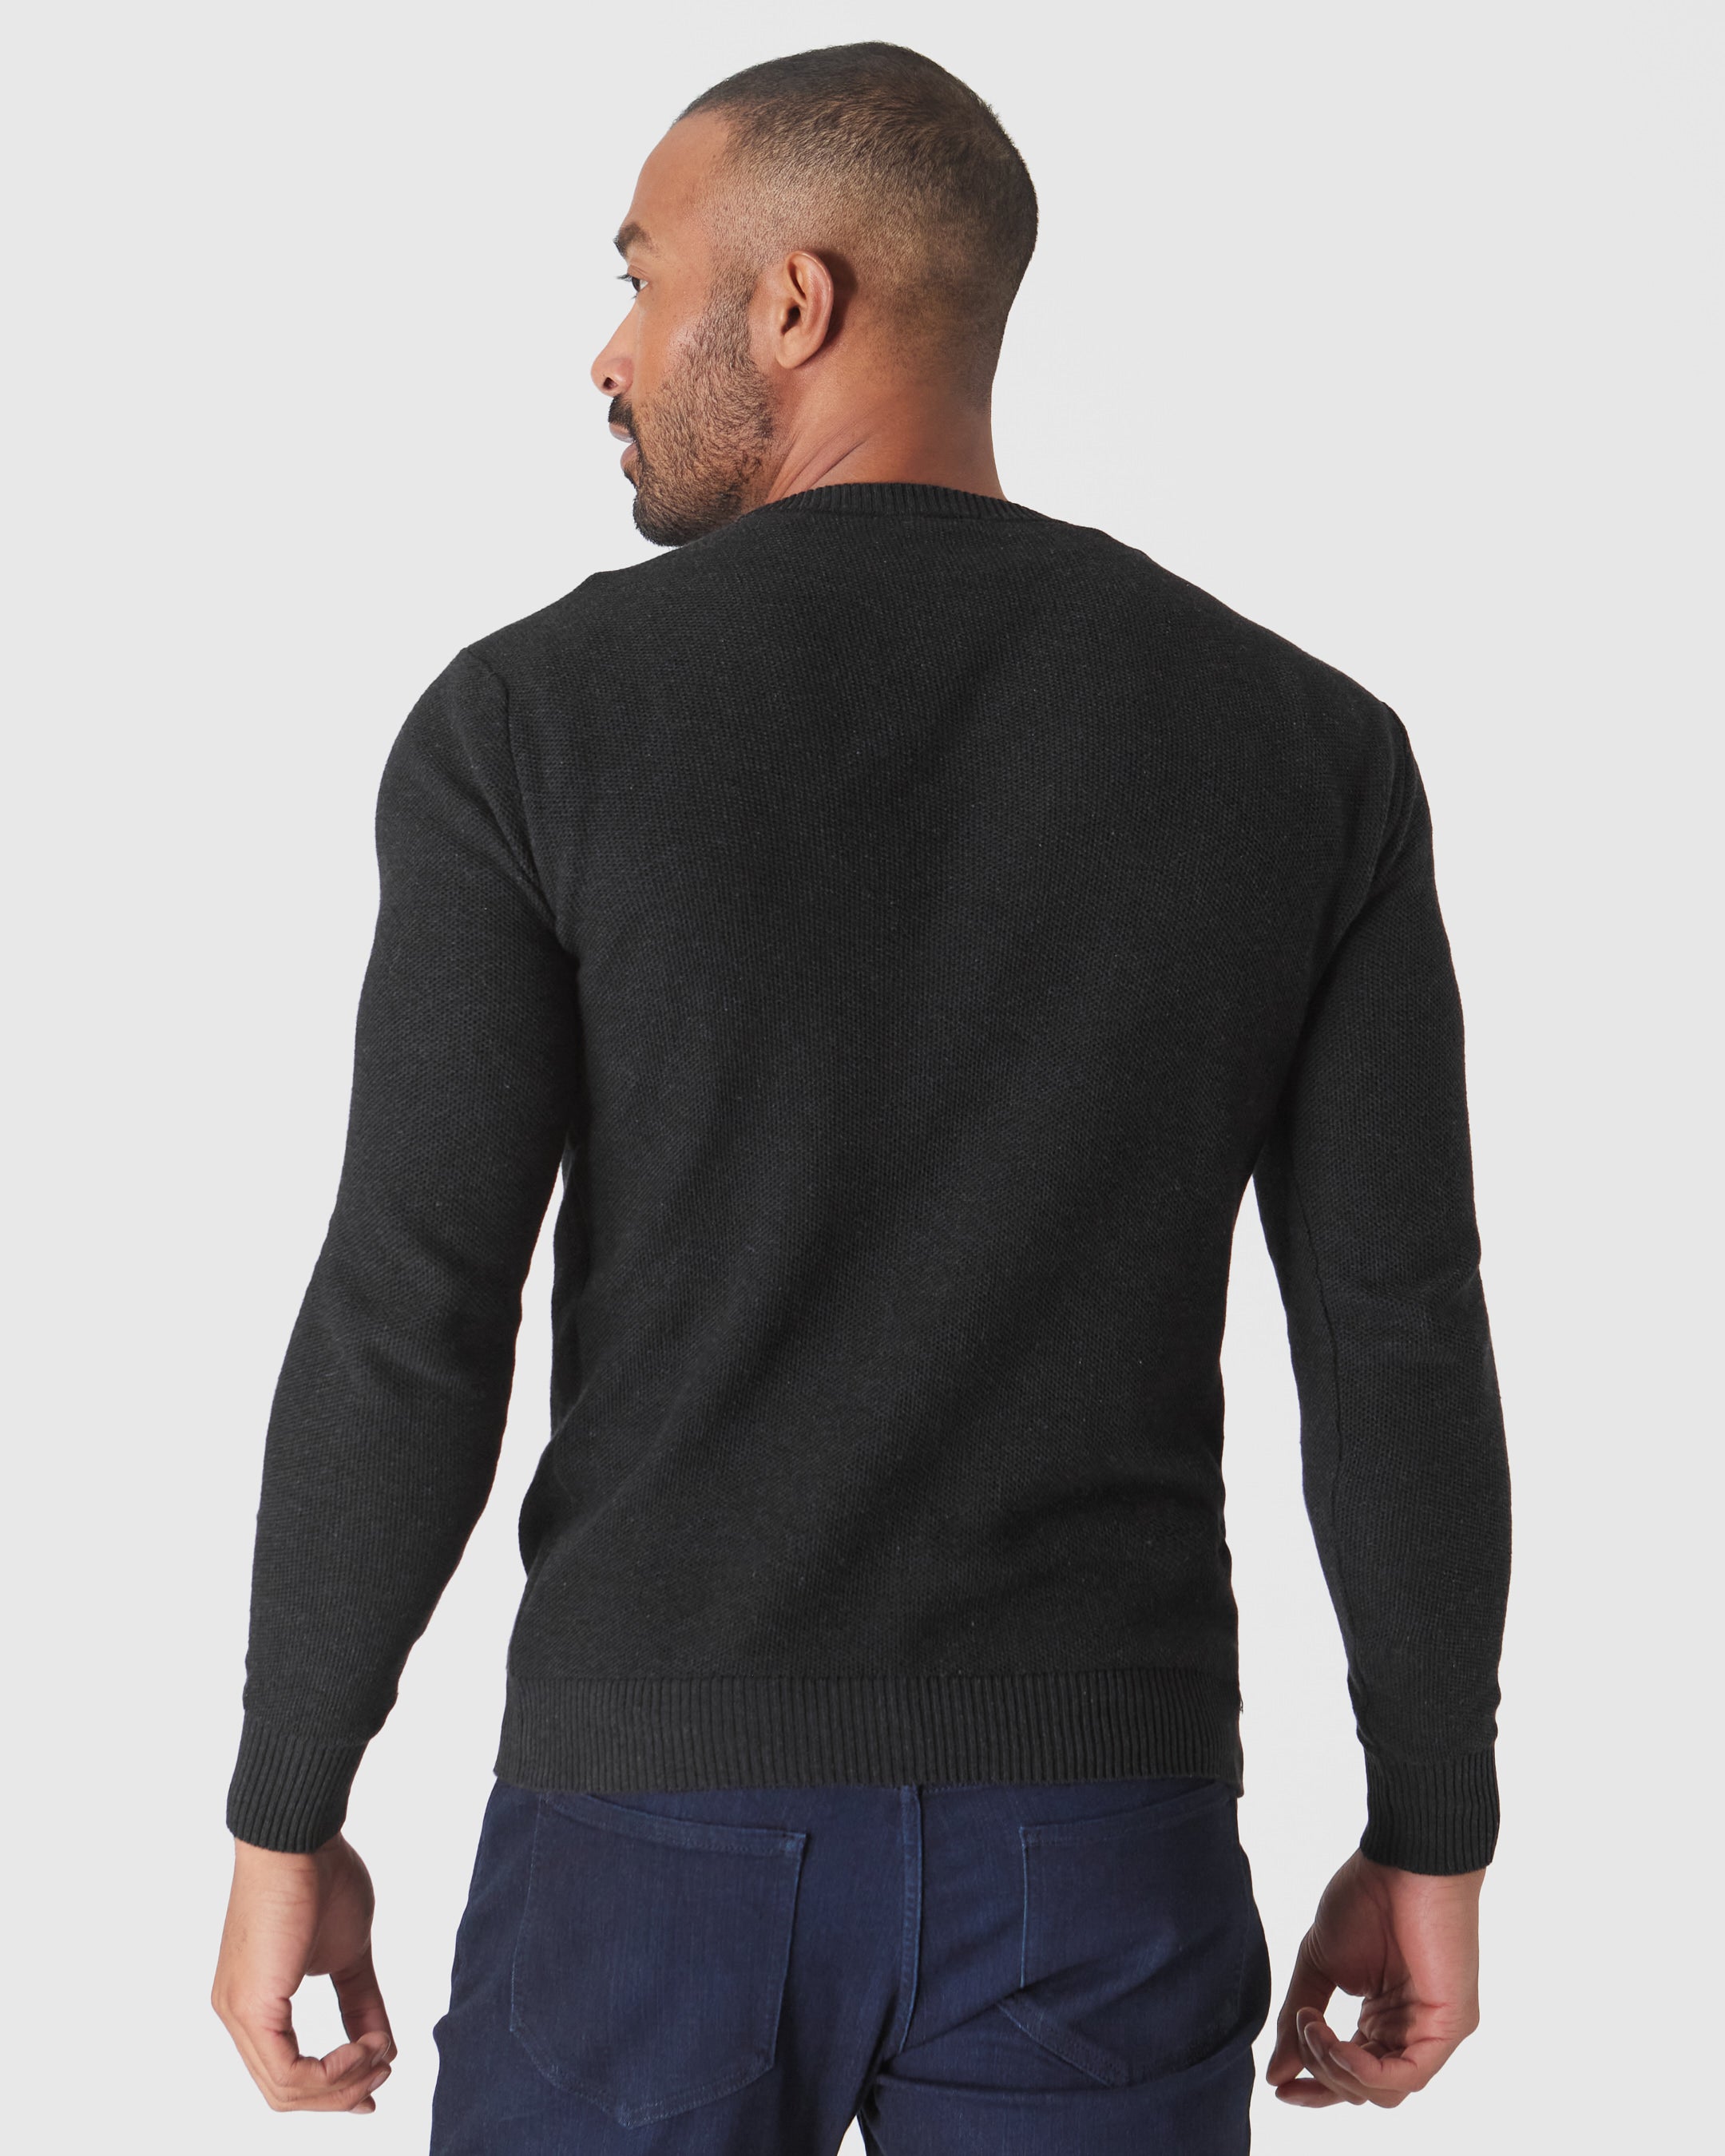 Charcoal Heather Gray Pique Crew Sweater